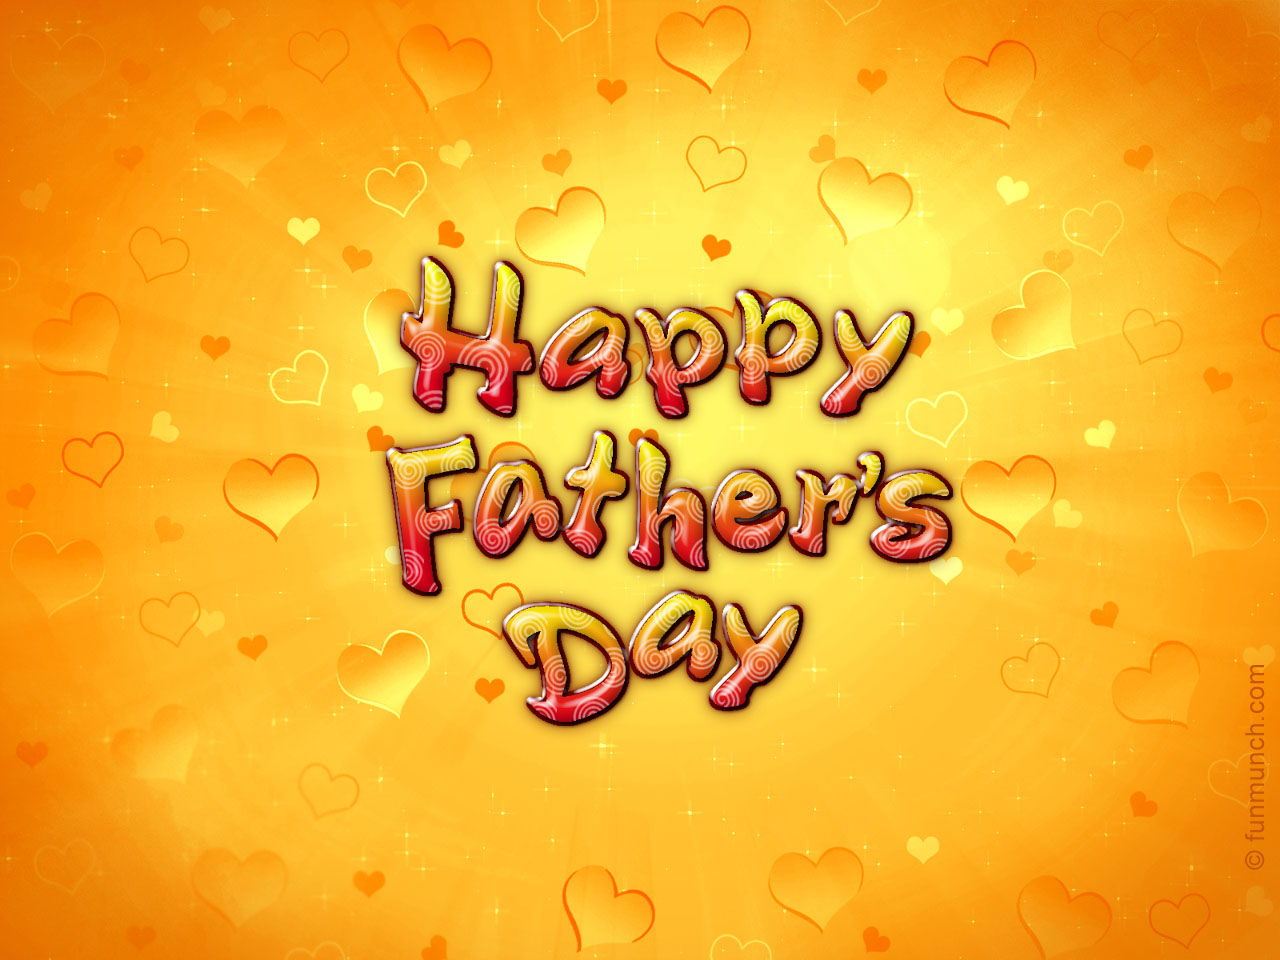 Happy Fathers' Day 2013